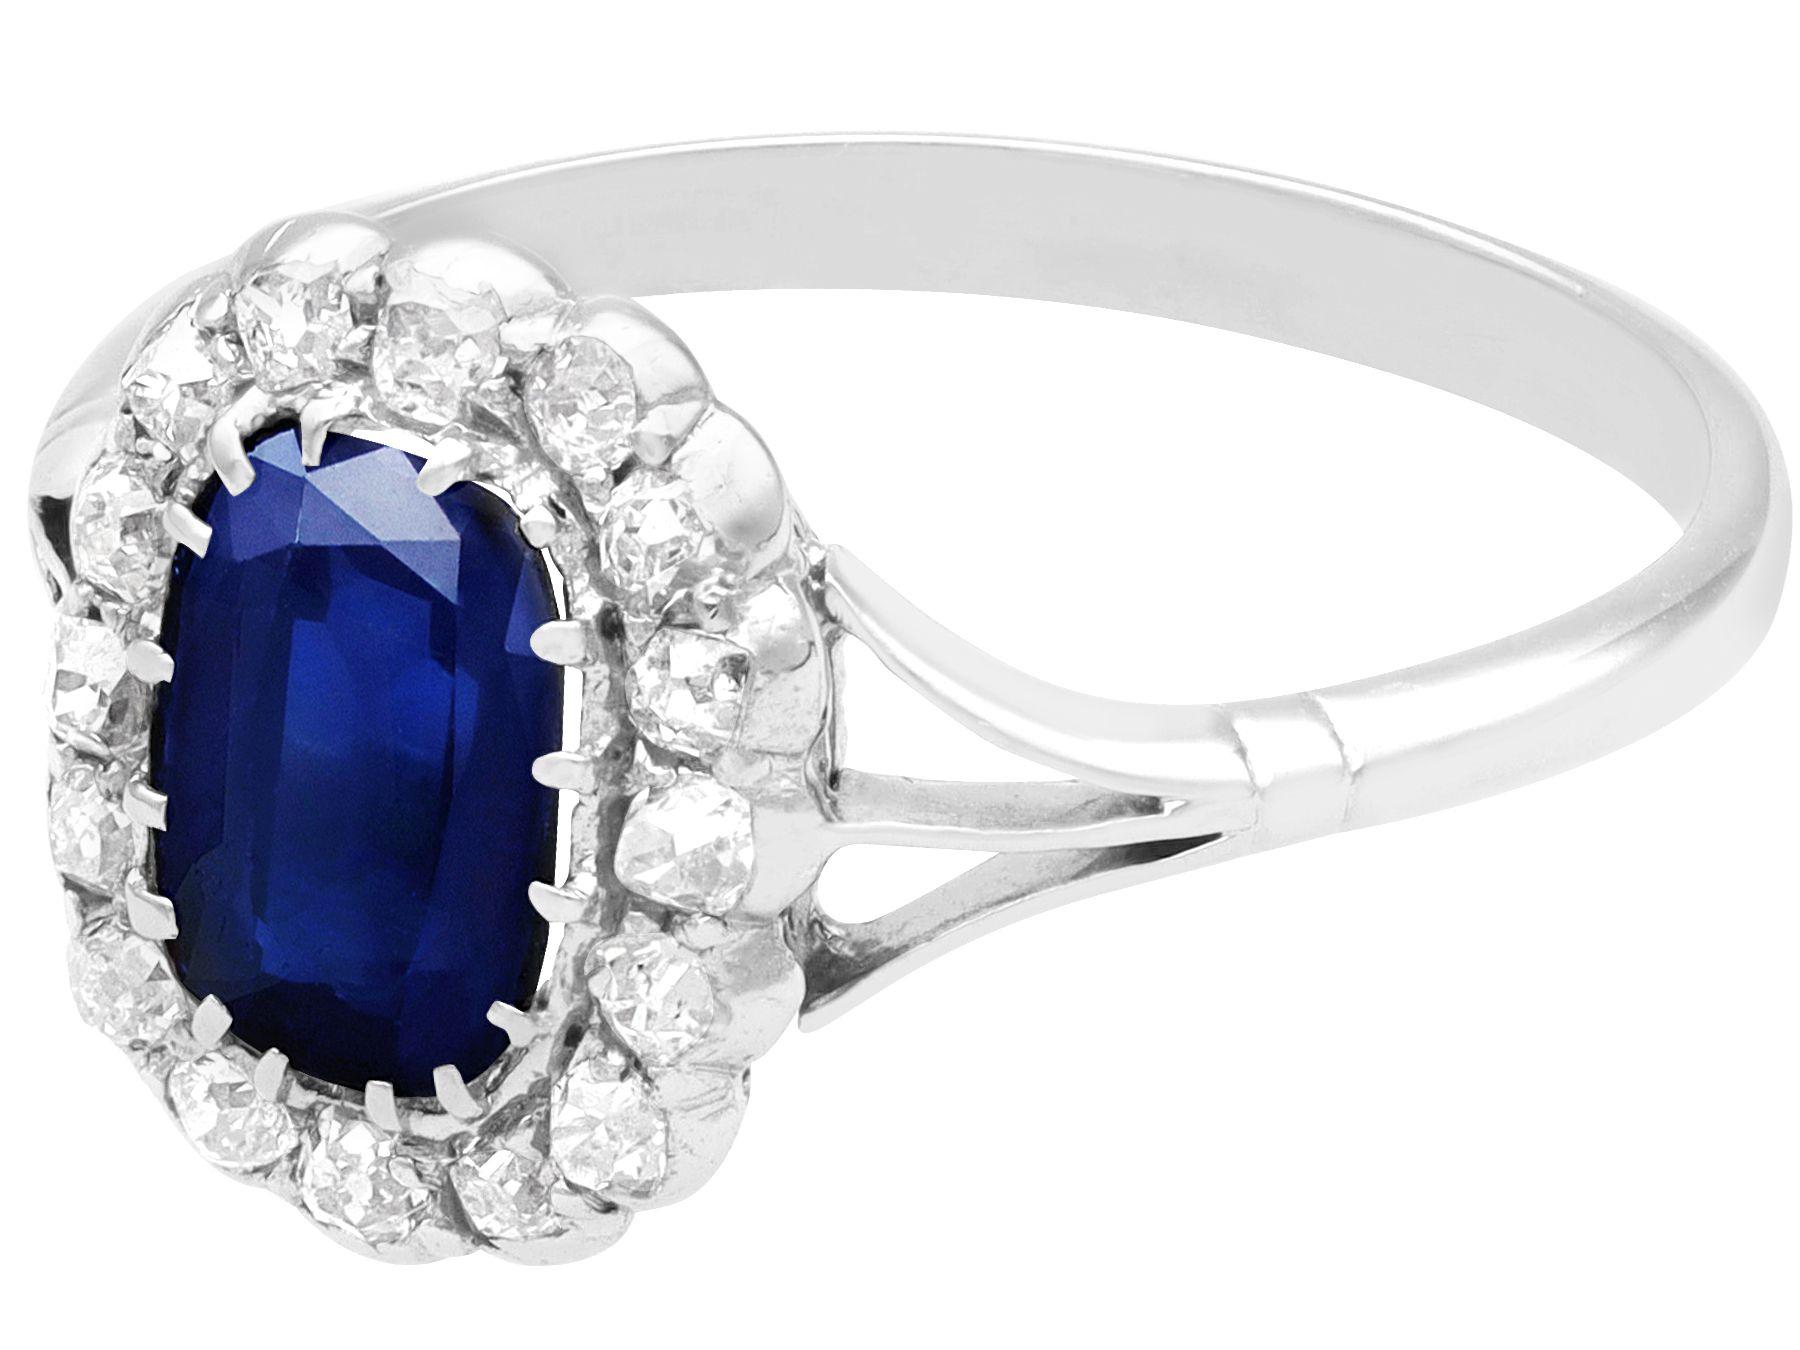 Cushion Cut Antique 1.55 Carat Sapphire and Diamond White Gold Cluster Ring For Sale